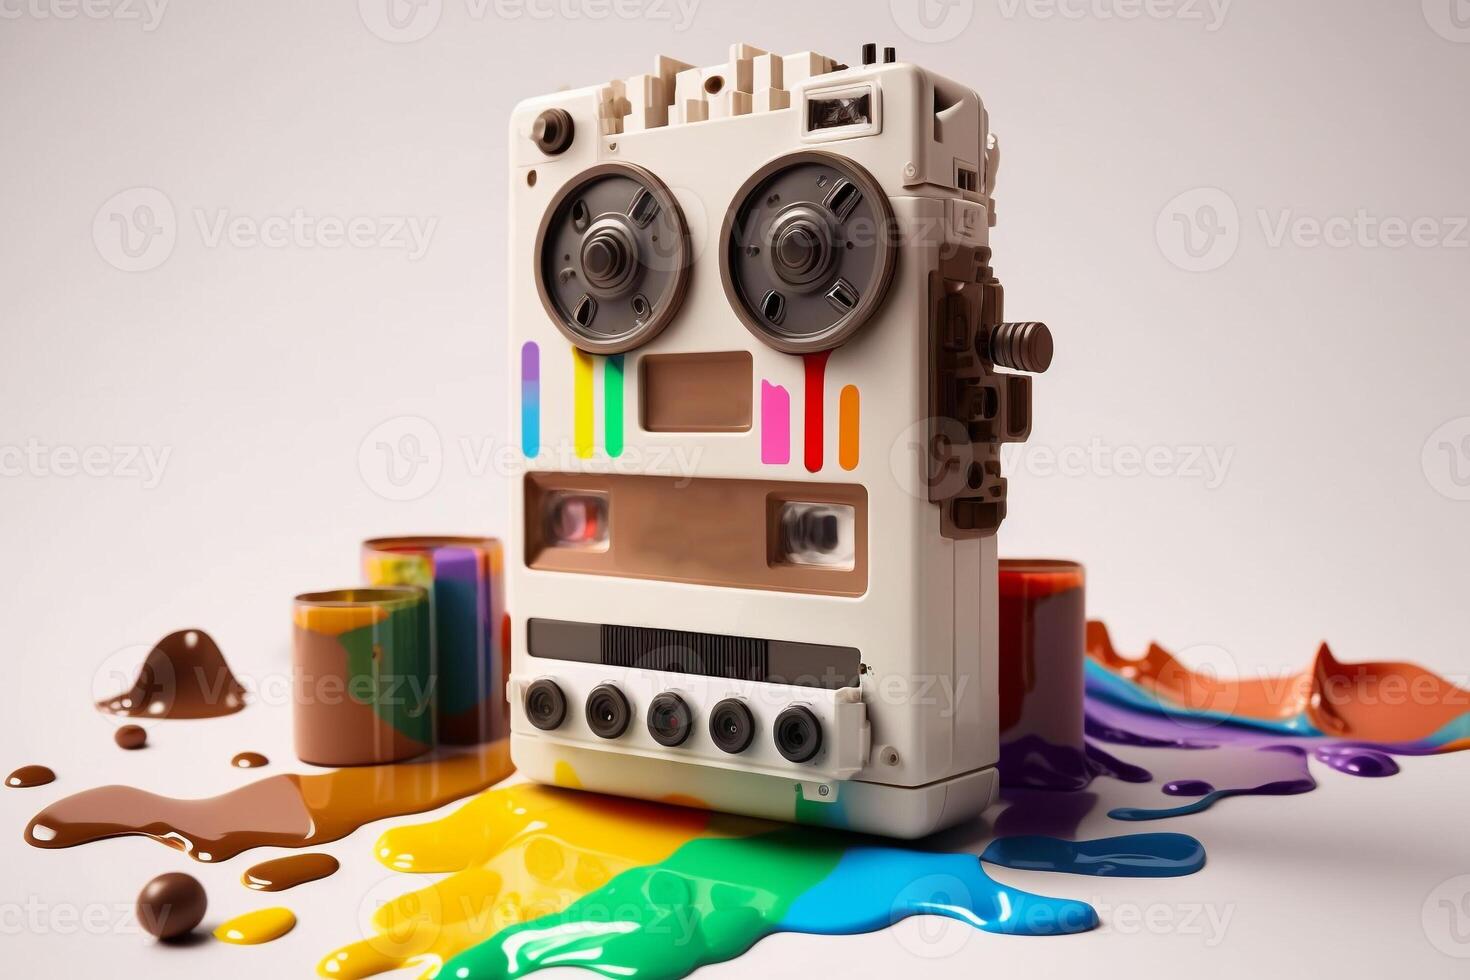 cassette stereo tape recorder in rainbow colors photo